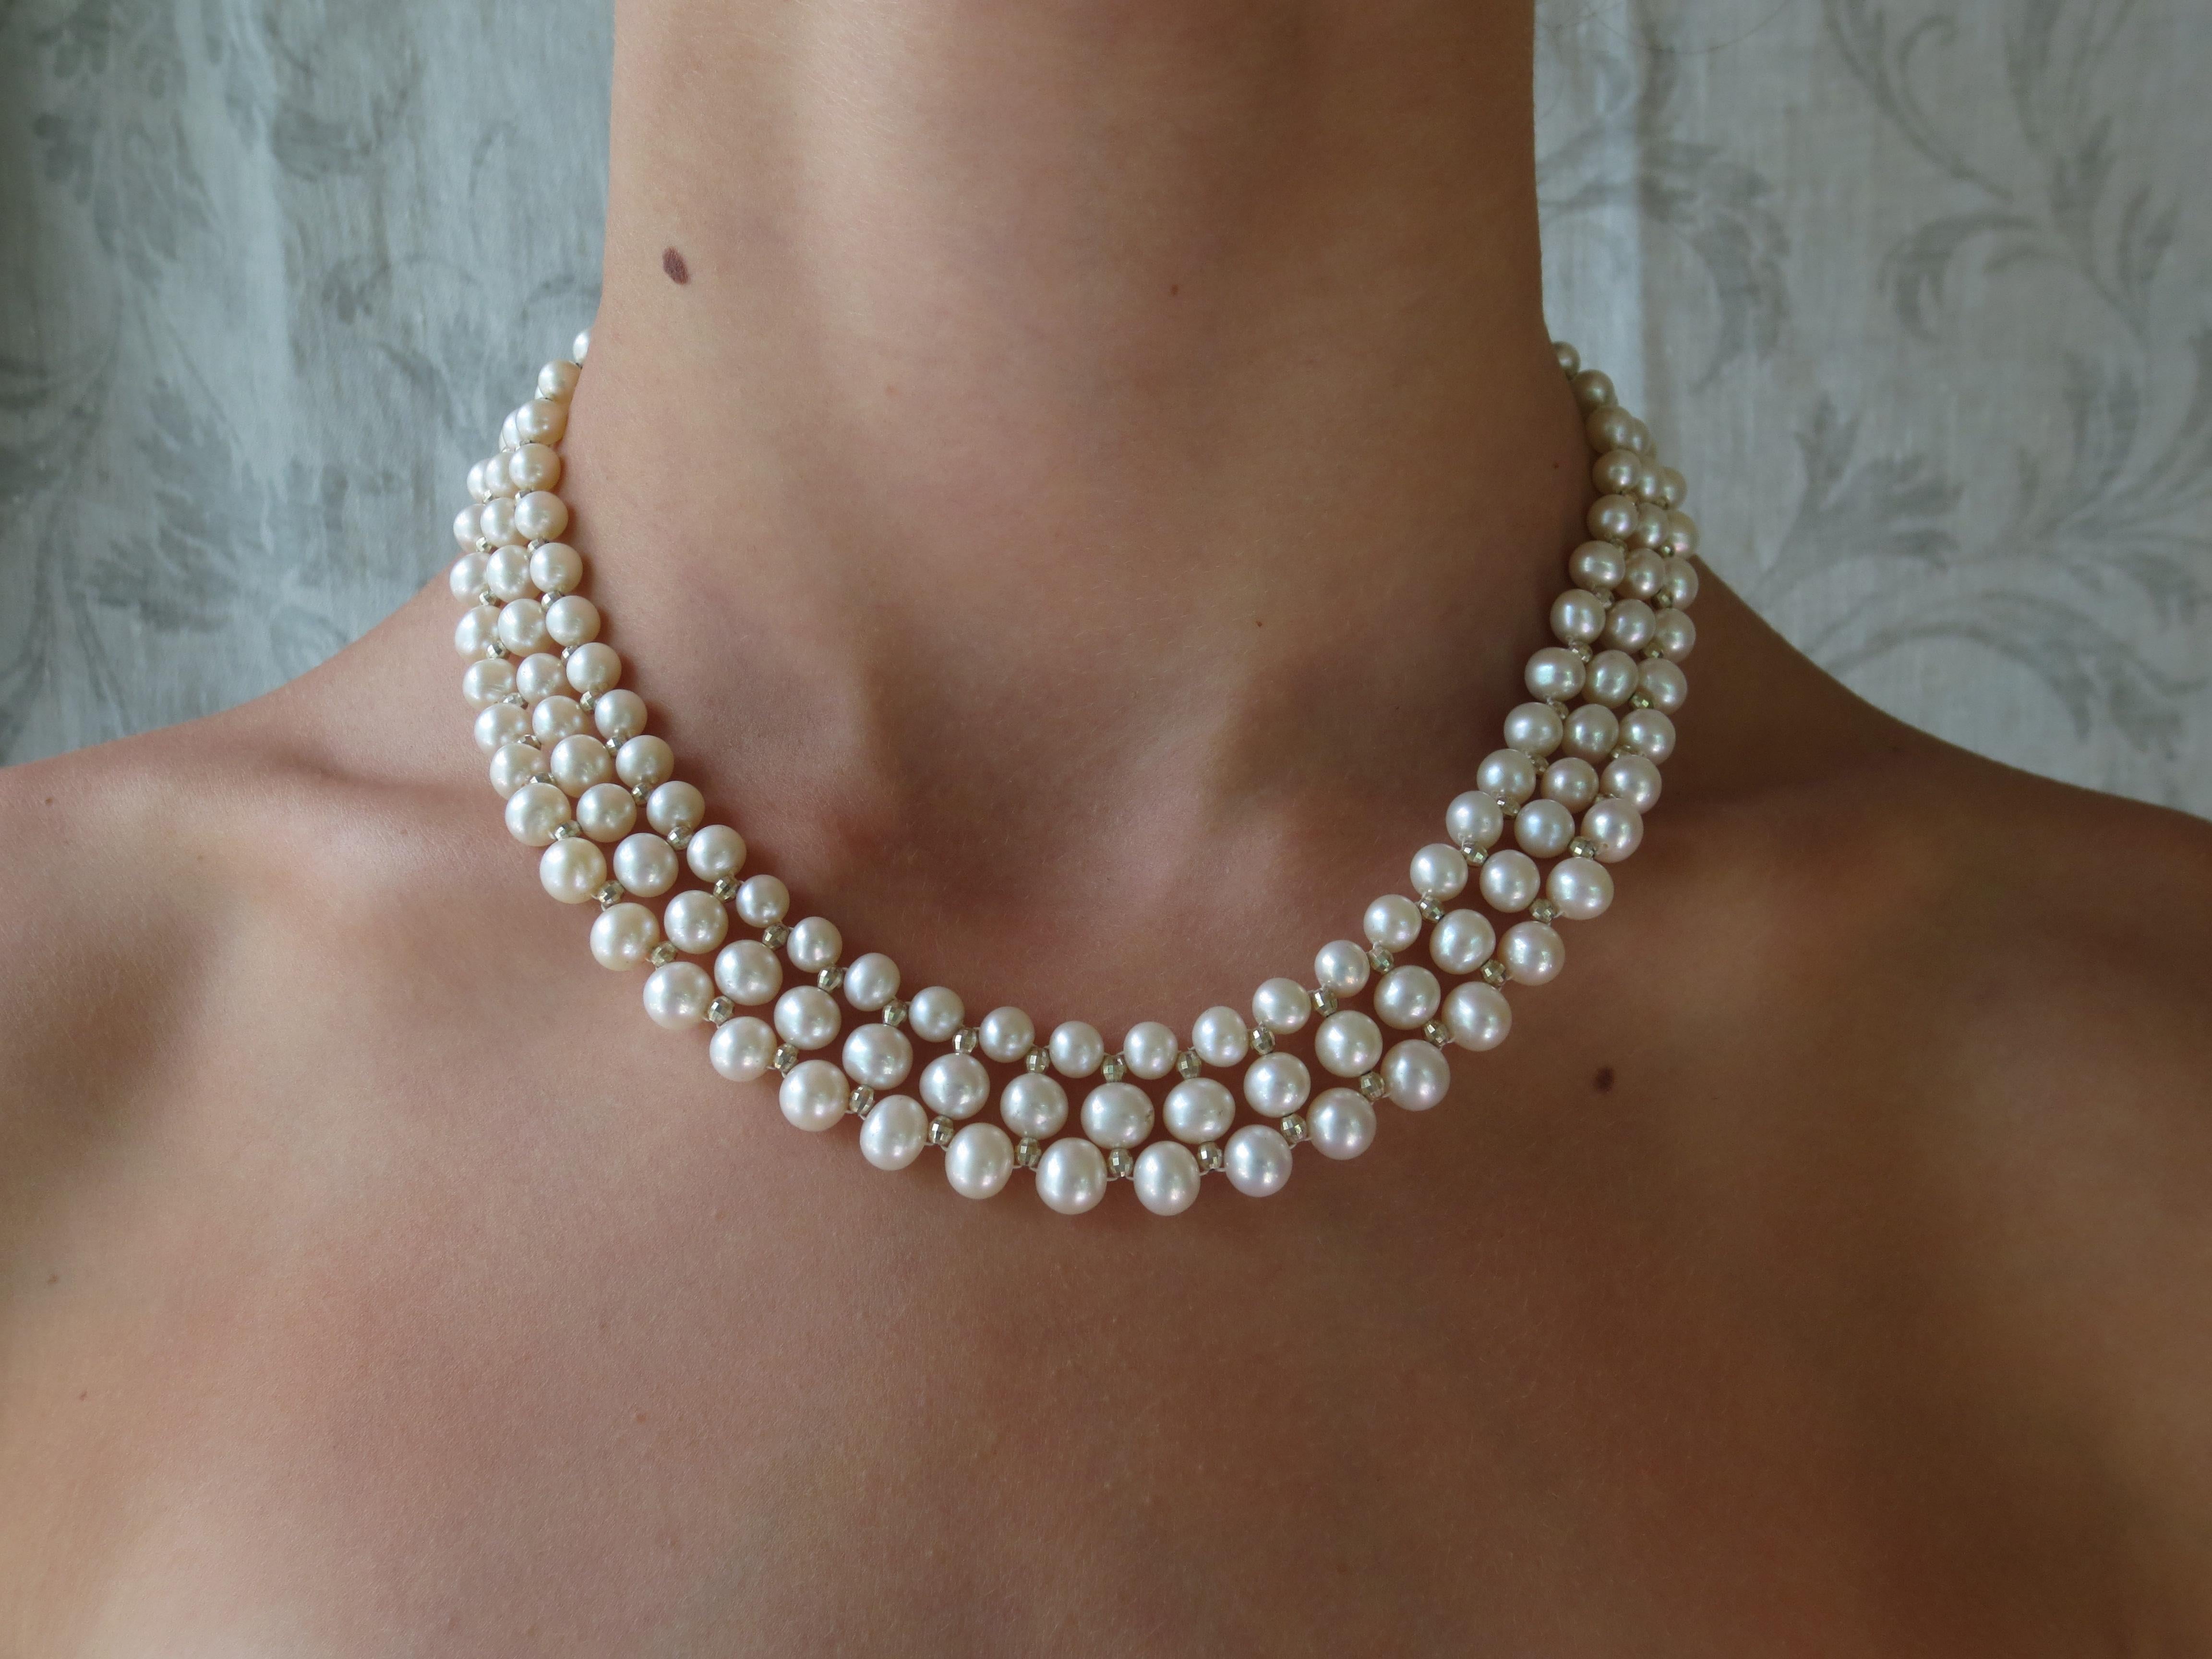 This woven white pearl necklace with 14k white gold faceted beads and sliding clasp glitters beautifully. This classic necklace is handmade by Marina J. with 14k white gold faceted beads and glowing white pearls woven together in an elegant design.